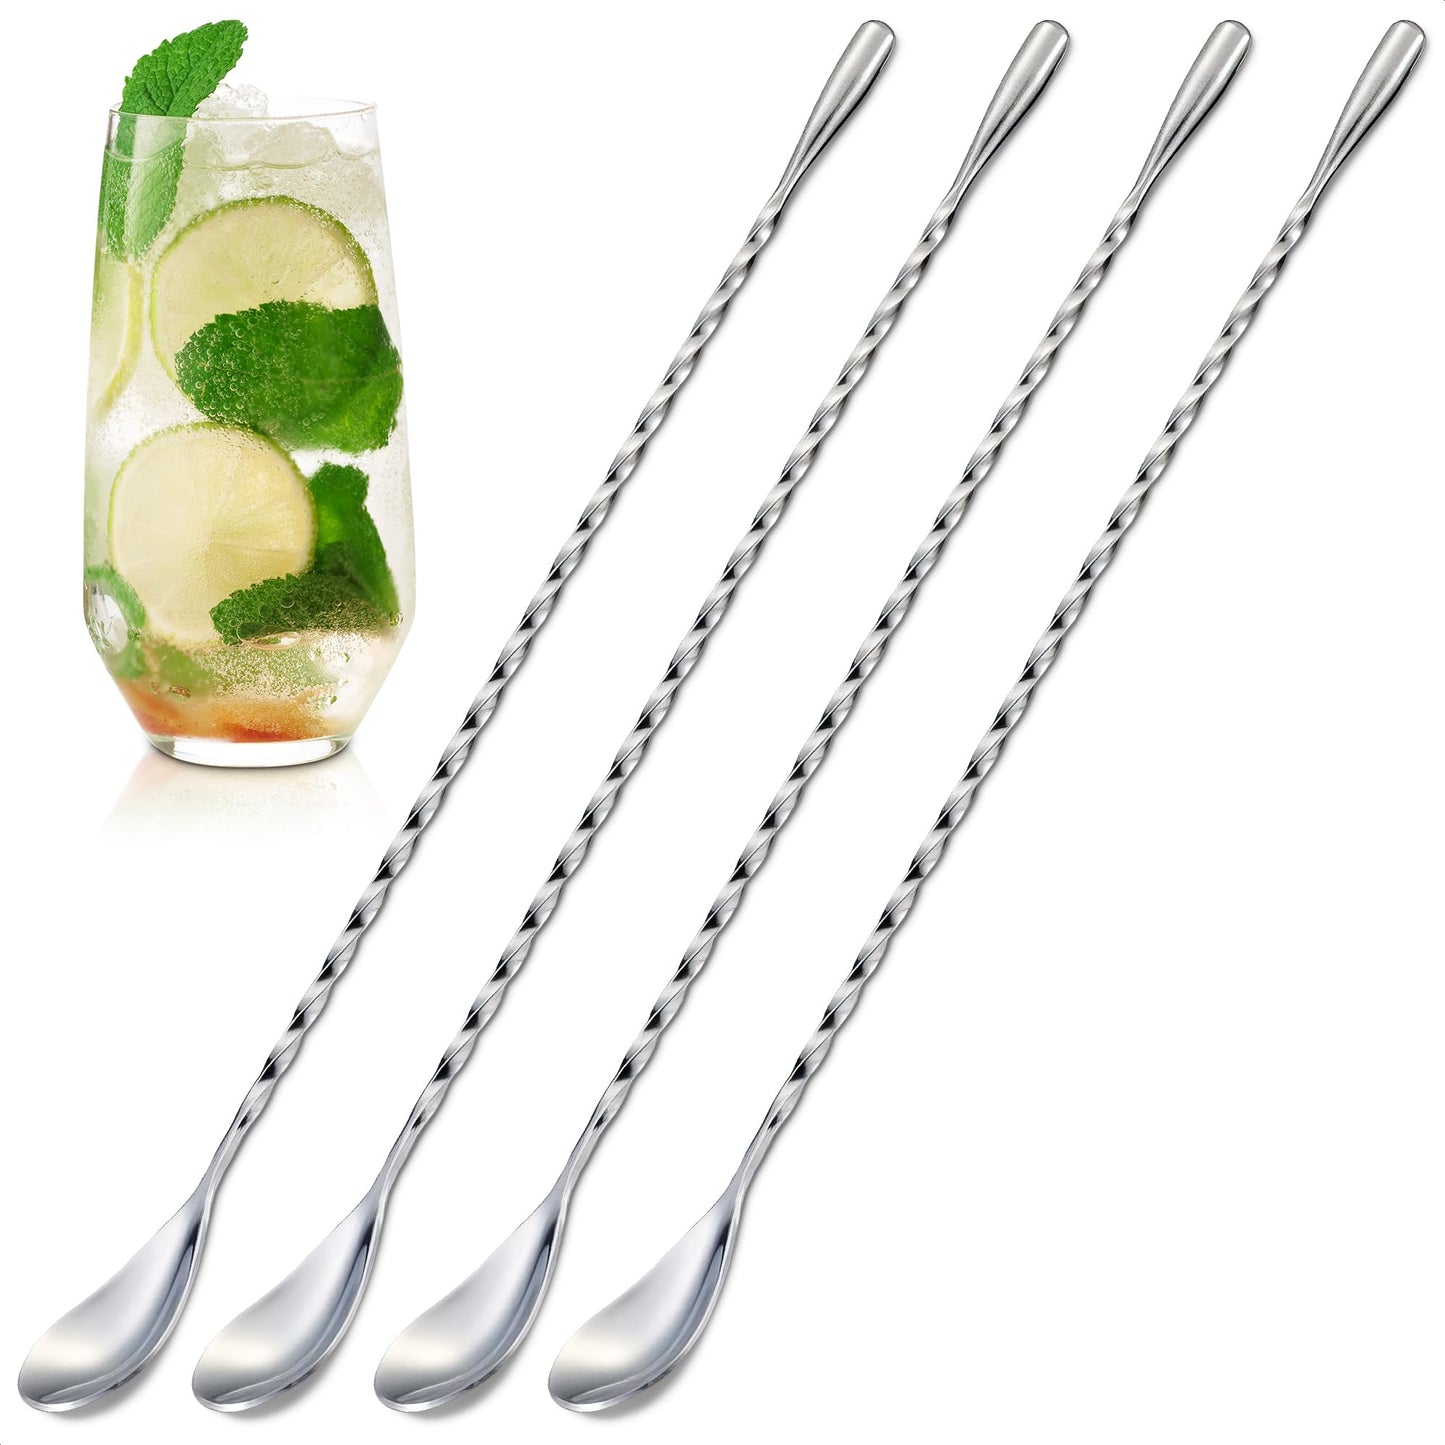 4Pcs Cocktail Spoon Long Handle Bar Spoon - 12" Metal Spoons Drink Mixers for Cocktails Stainless Steel Spoons Stirring Spoons for Coffee Bar Accessories - Home Bar Mixing Spoon Long Handle Spoon Set